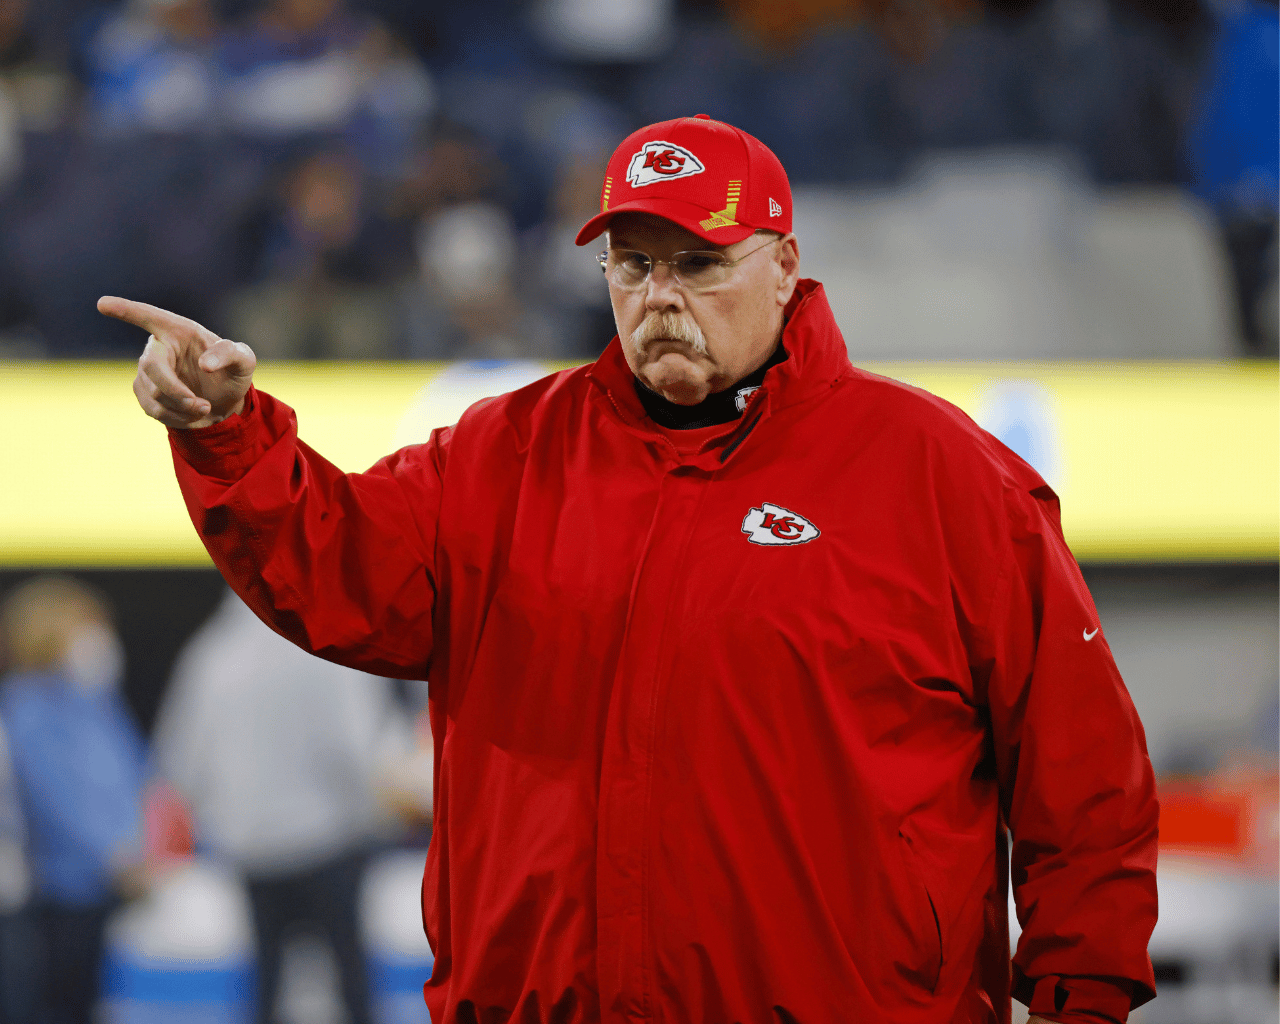 Fans Call For Terry Bradshaw To Be Fired After He 'Fat-Shamed' Kansas City  Chiefs' Coach Andy Reid